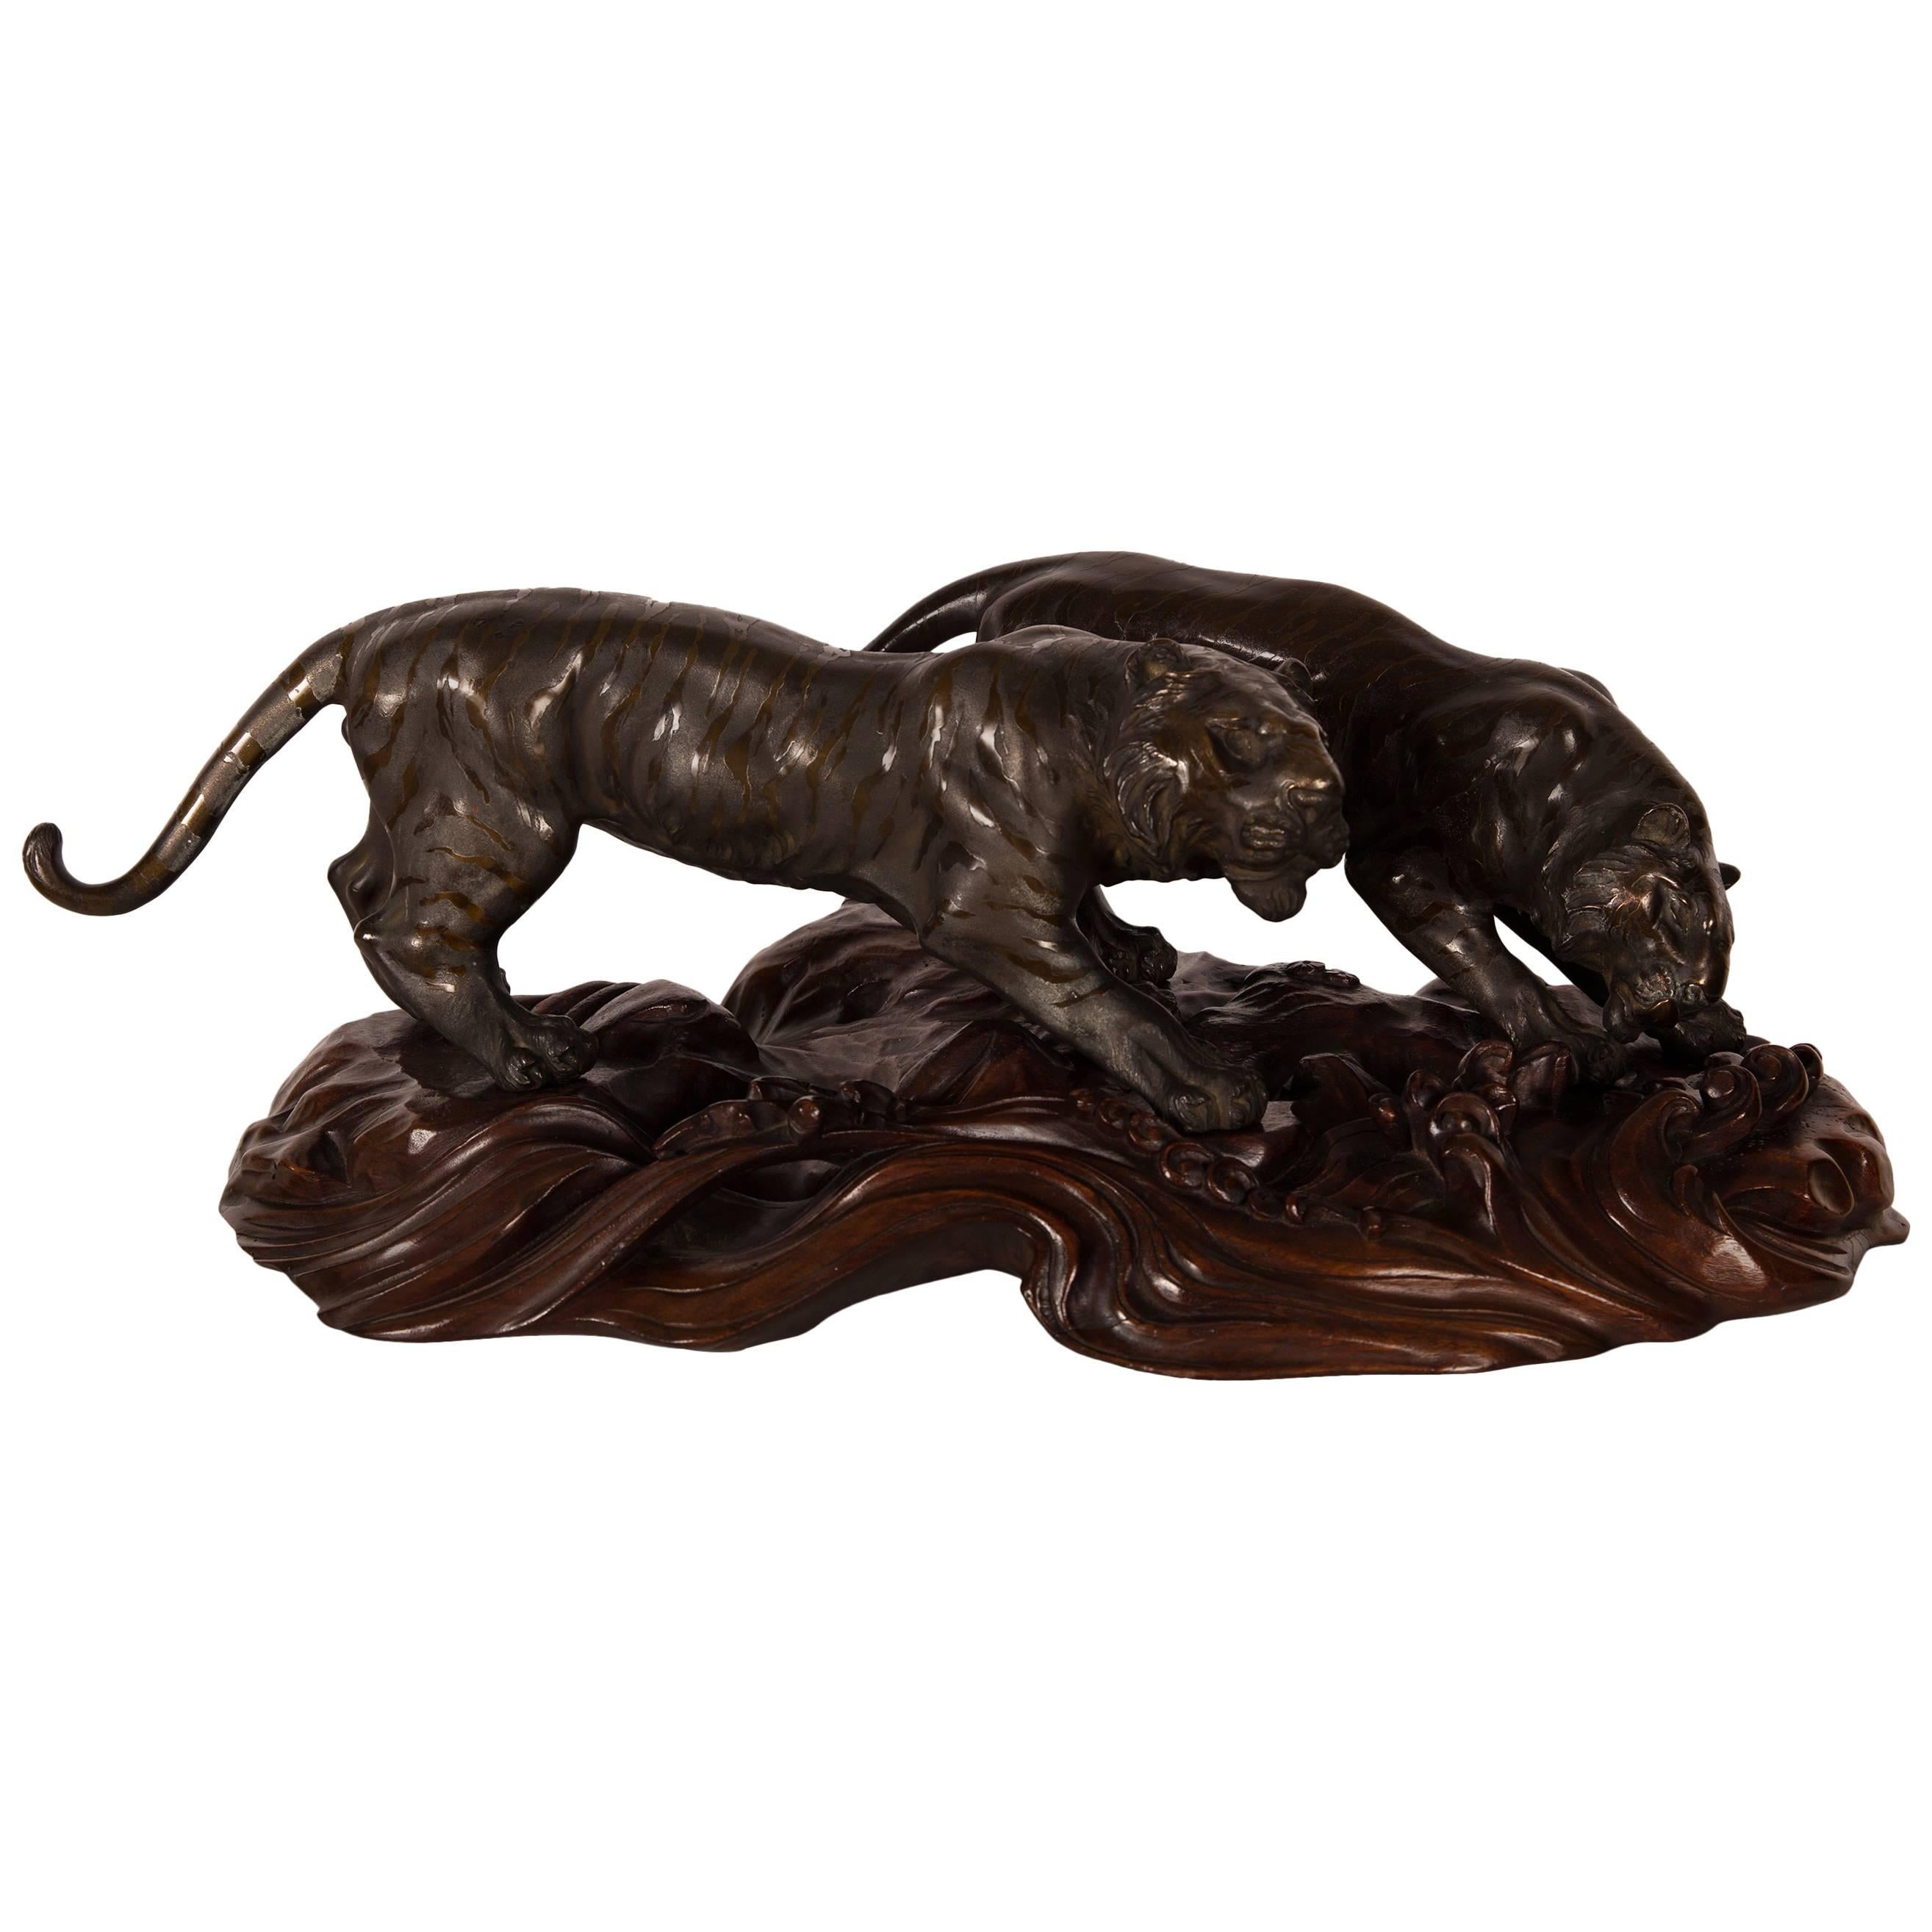 Meiji Period Japanese Bronze of Two Preying Tigers For Sale